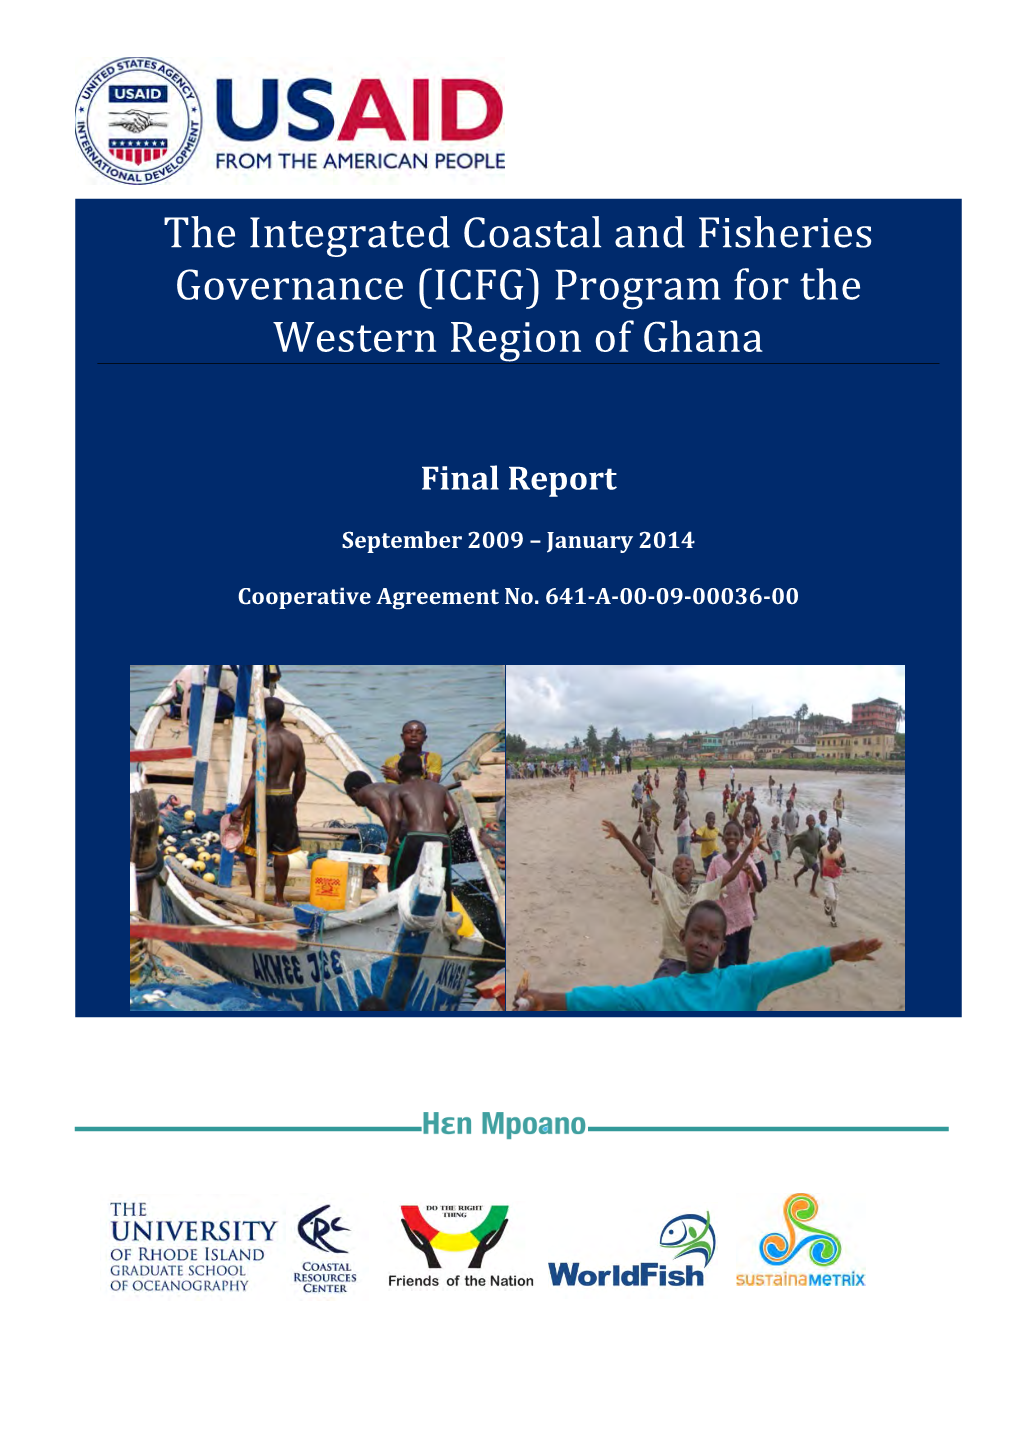 The Integrated Coastal and Fisheries Governance (ICFG) Program for the Western Region of Ghana